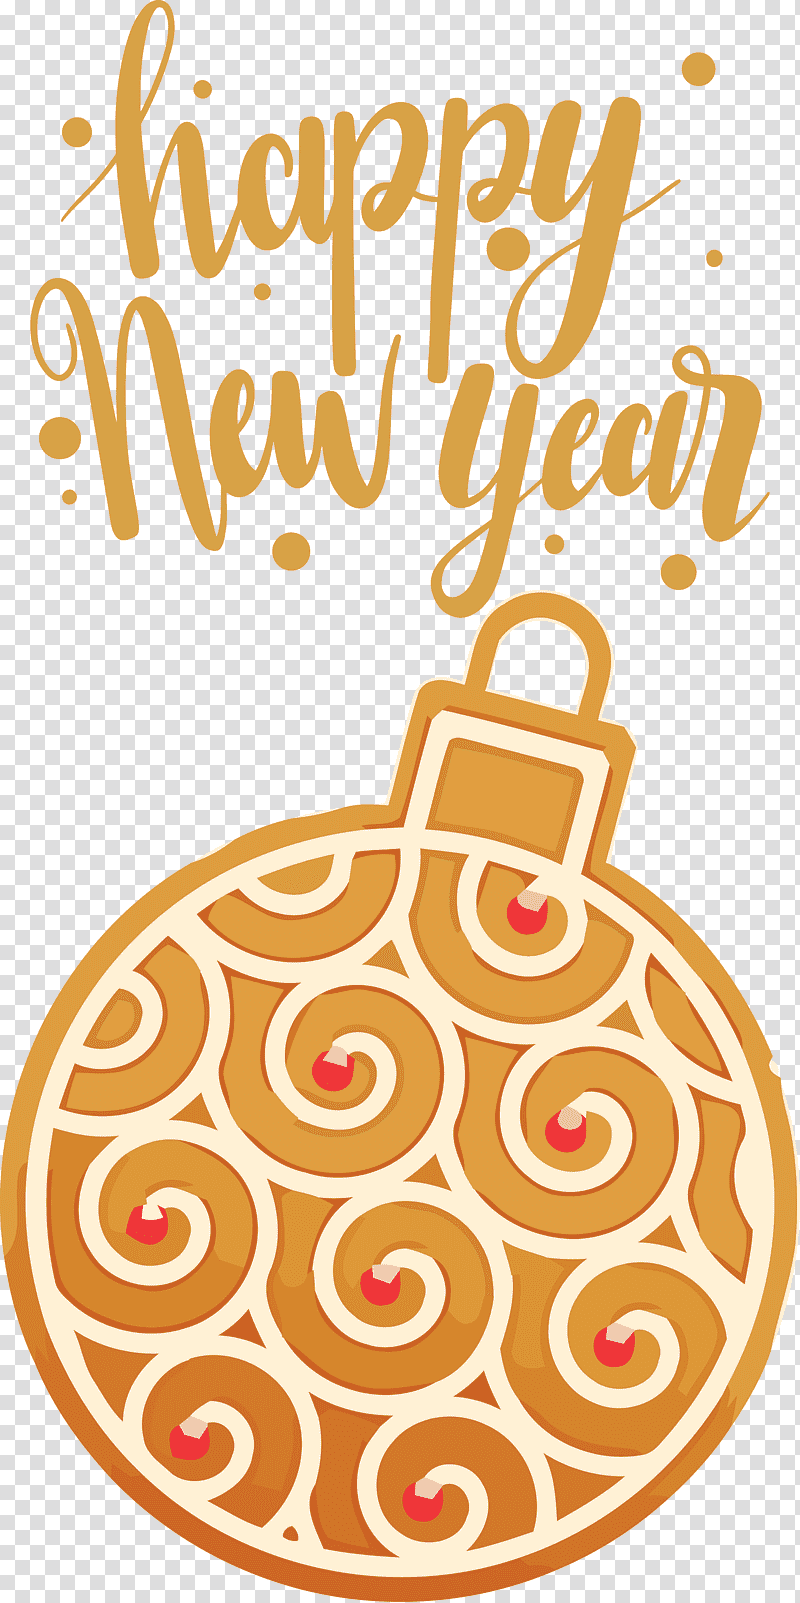 2021 Happy New Year 2021 New Year Happy New Year, New Years Day, Holiday, Chinese New Year, Nowruz, Sticker, New Years Eve transparent background PNG clipart